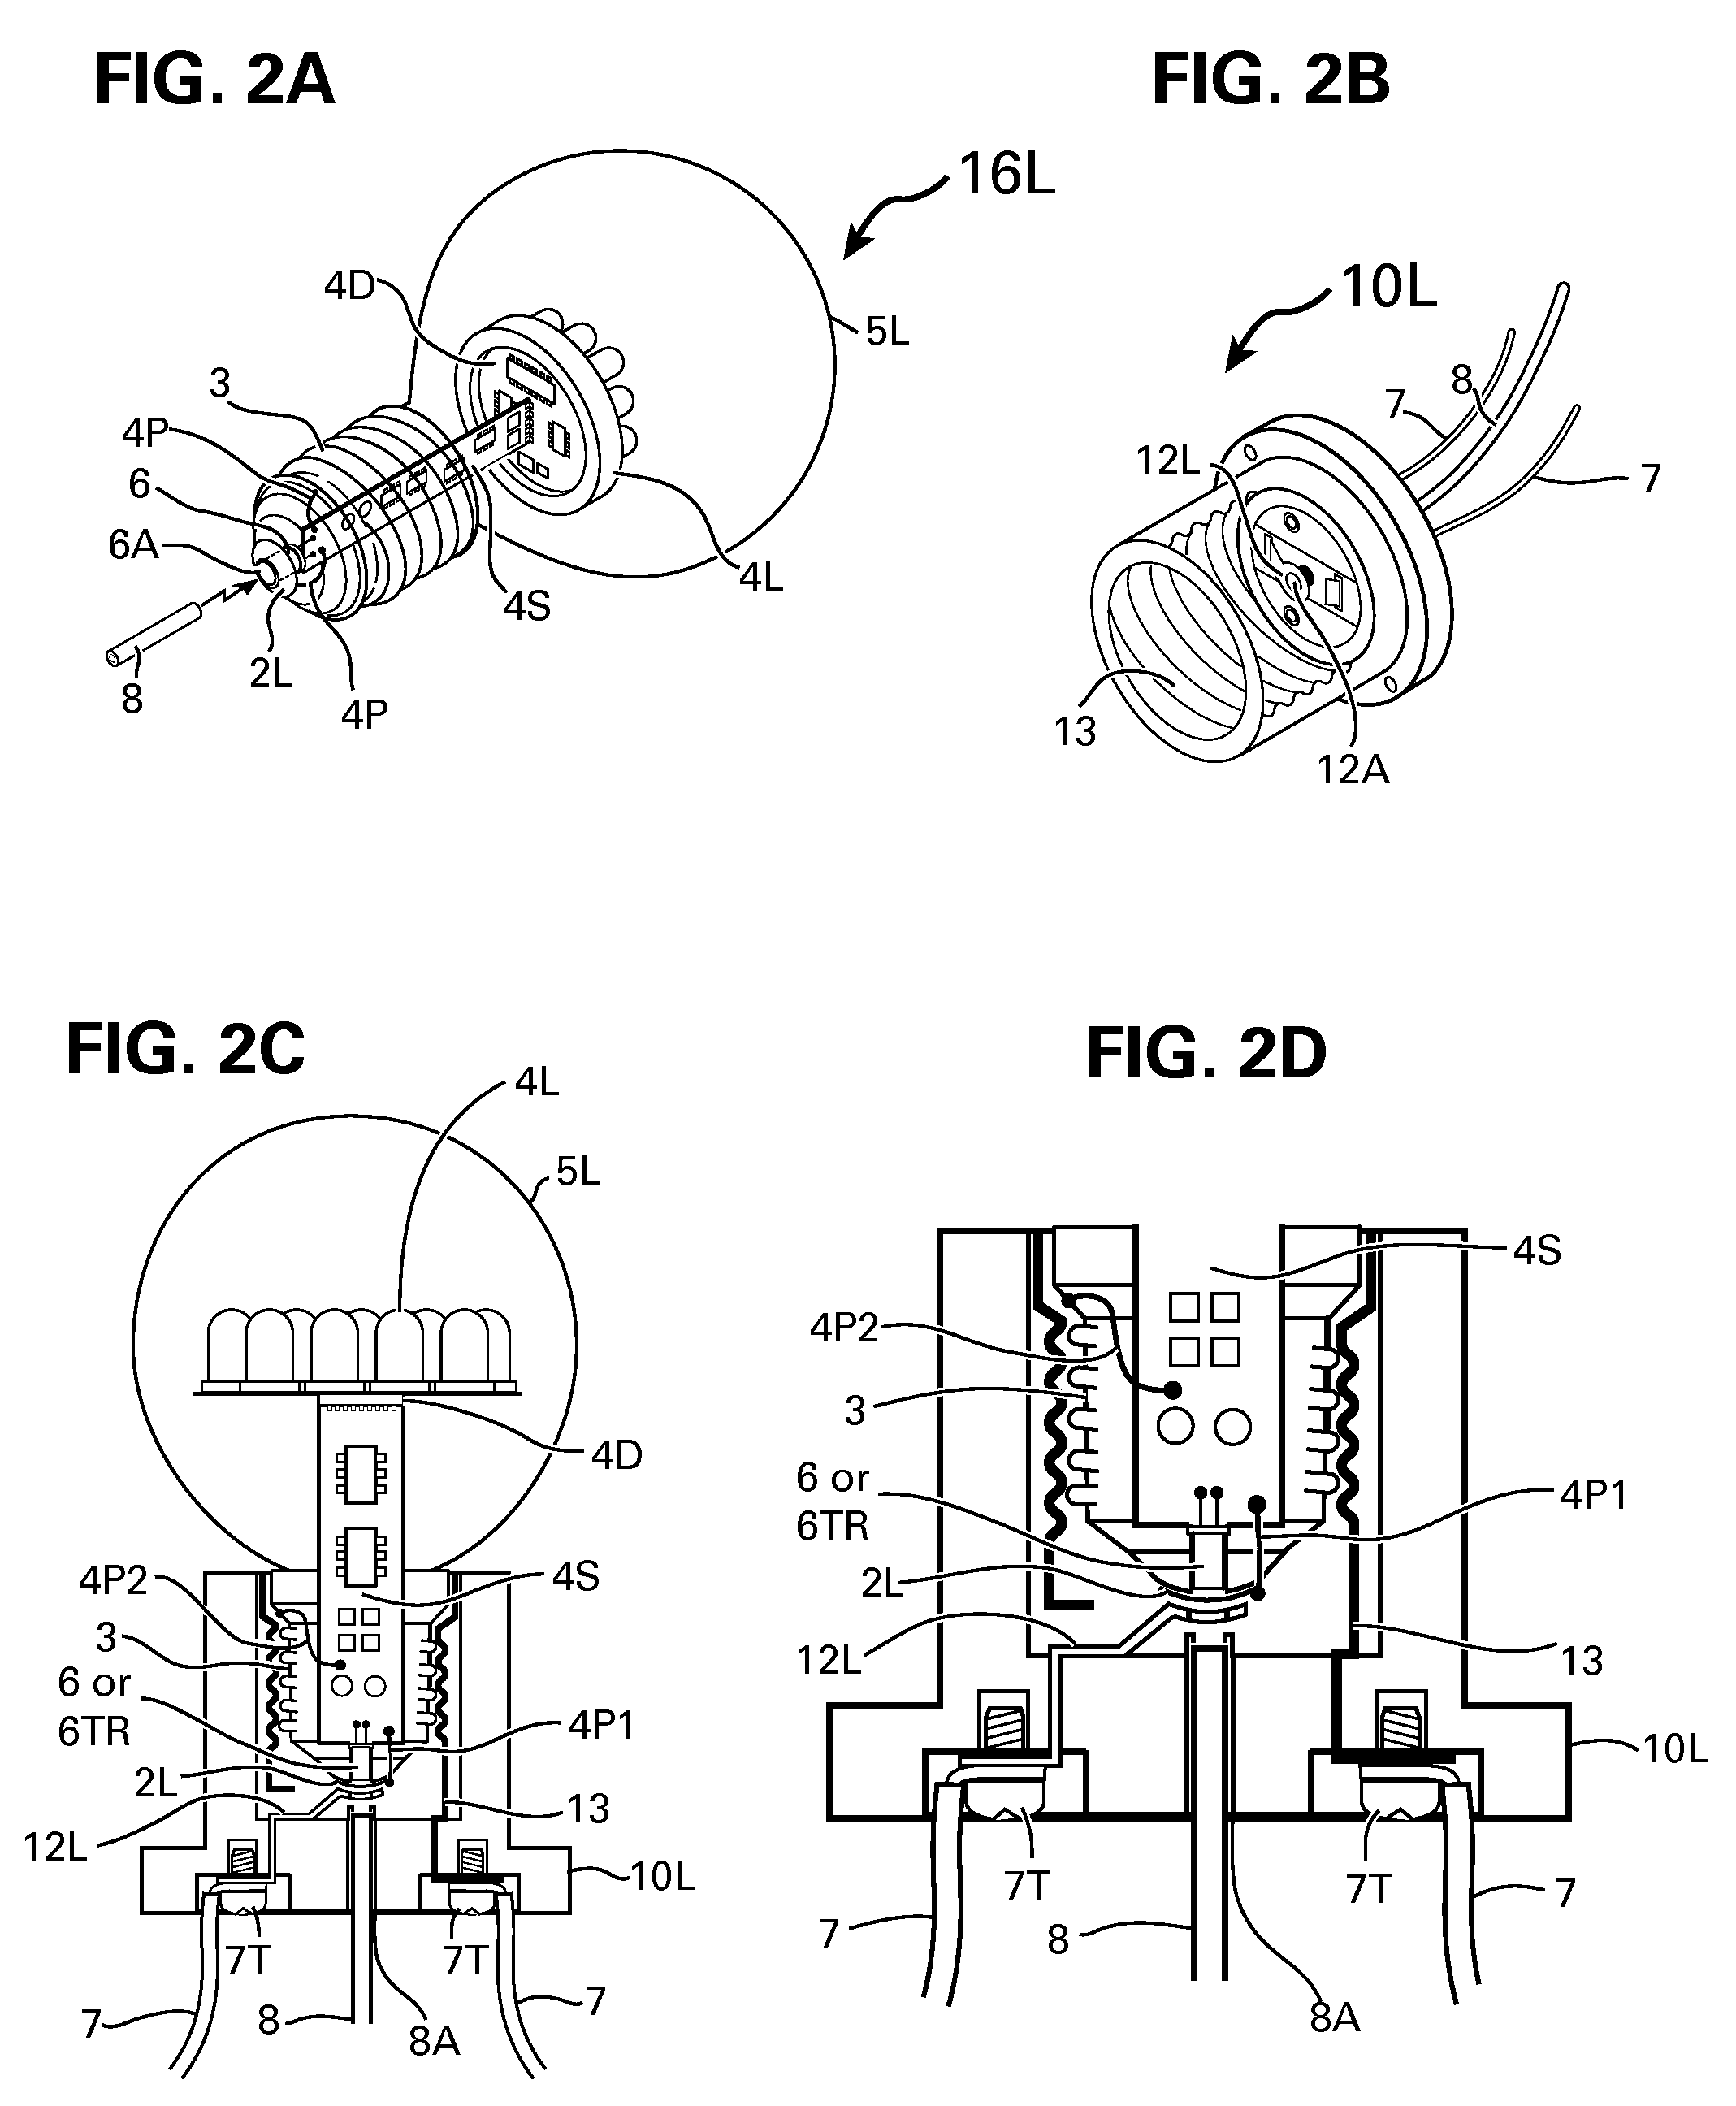 Method and apparatus for propagating optical signals along with power feed to illuminators and electrical appliances